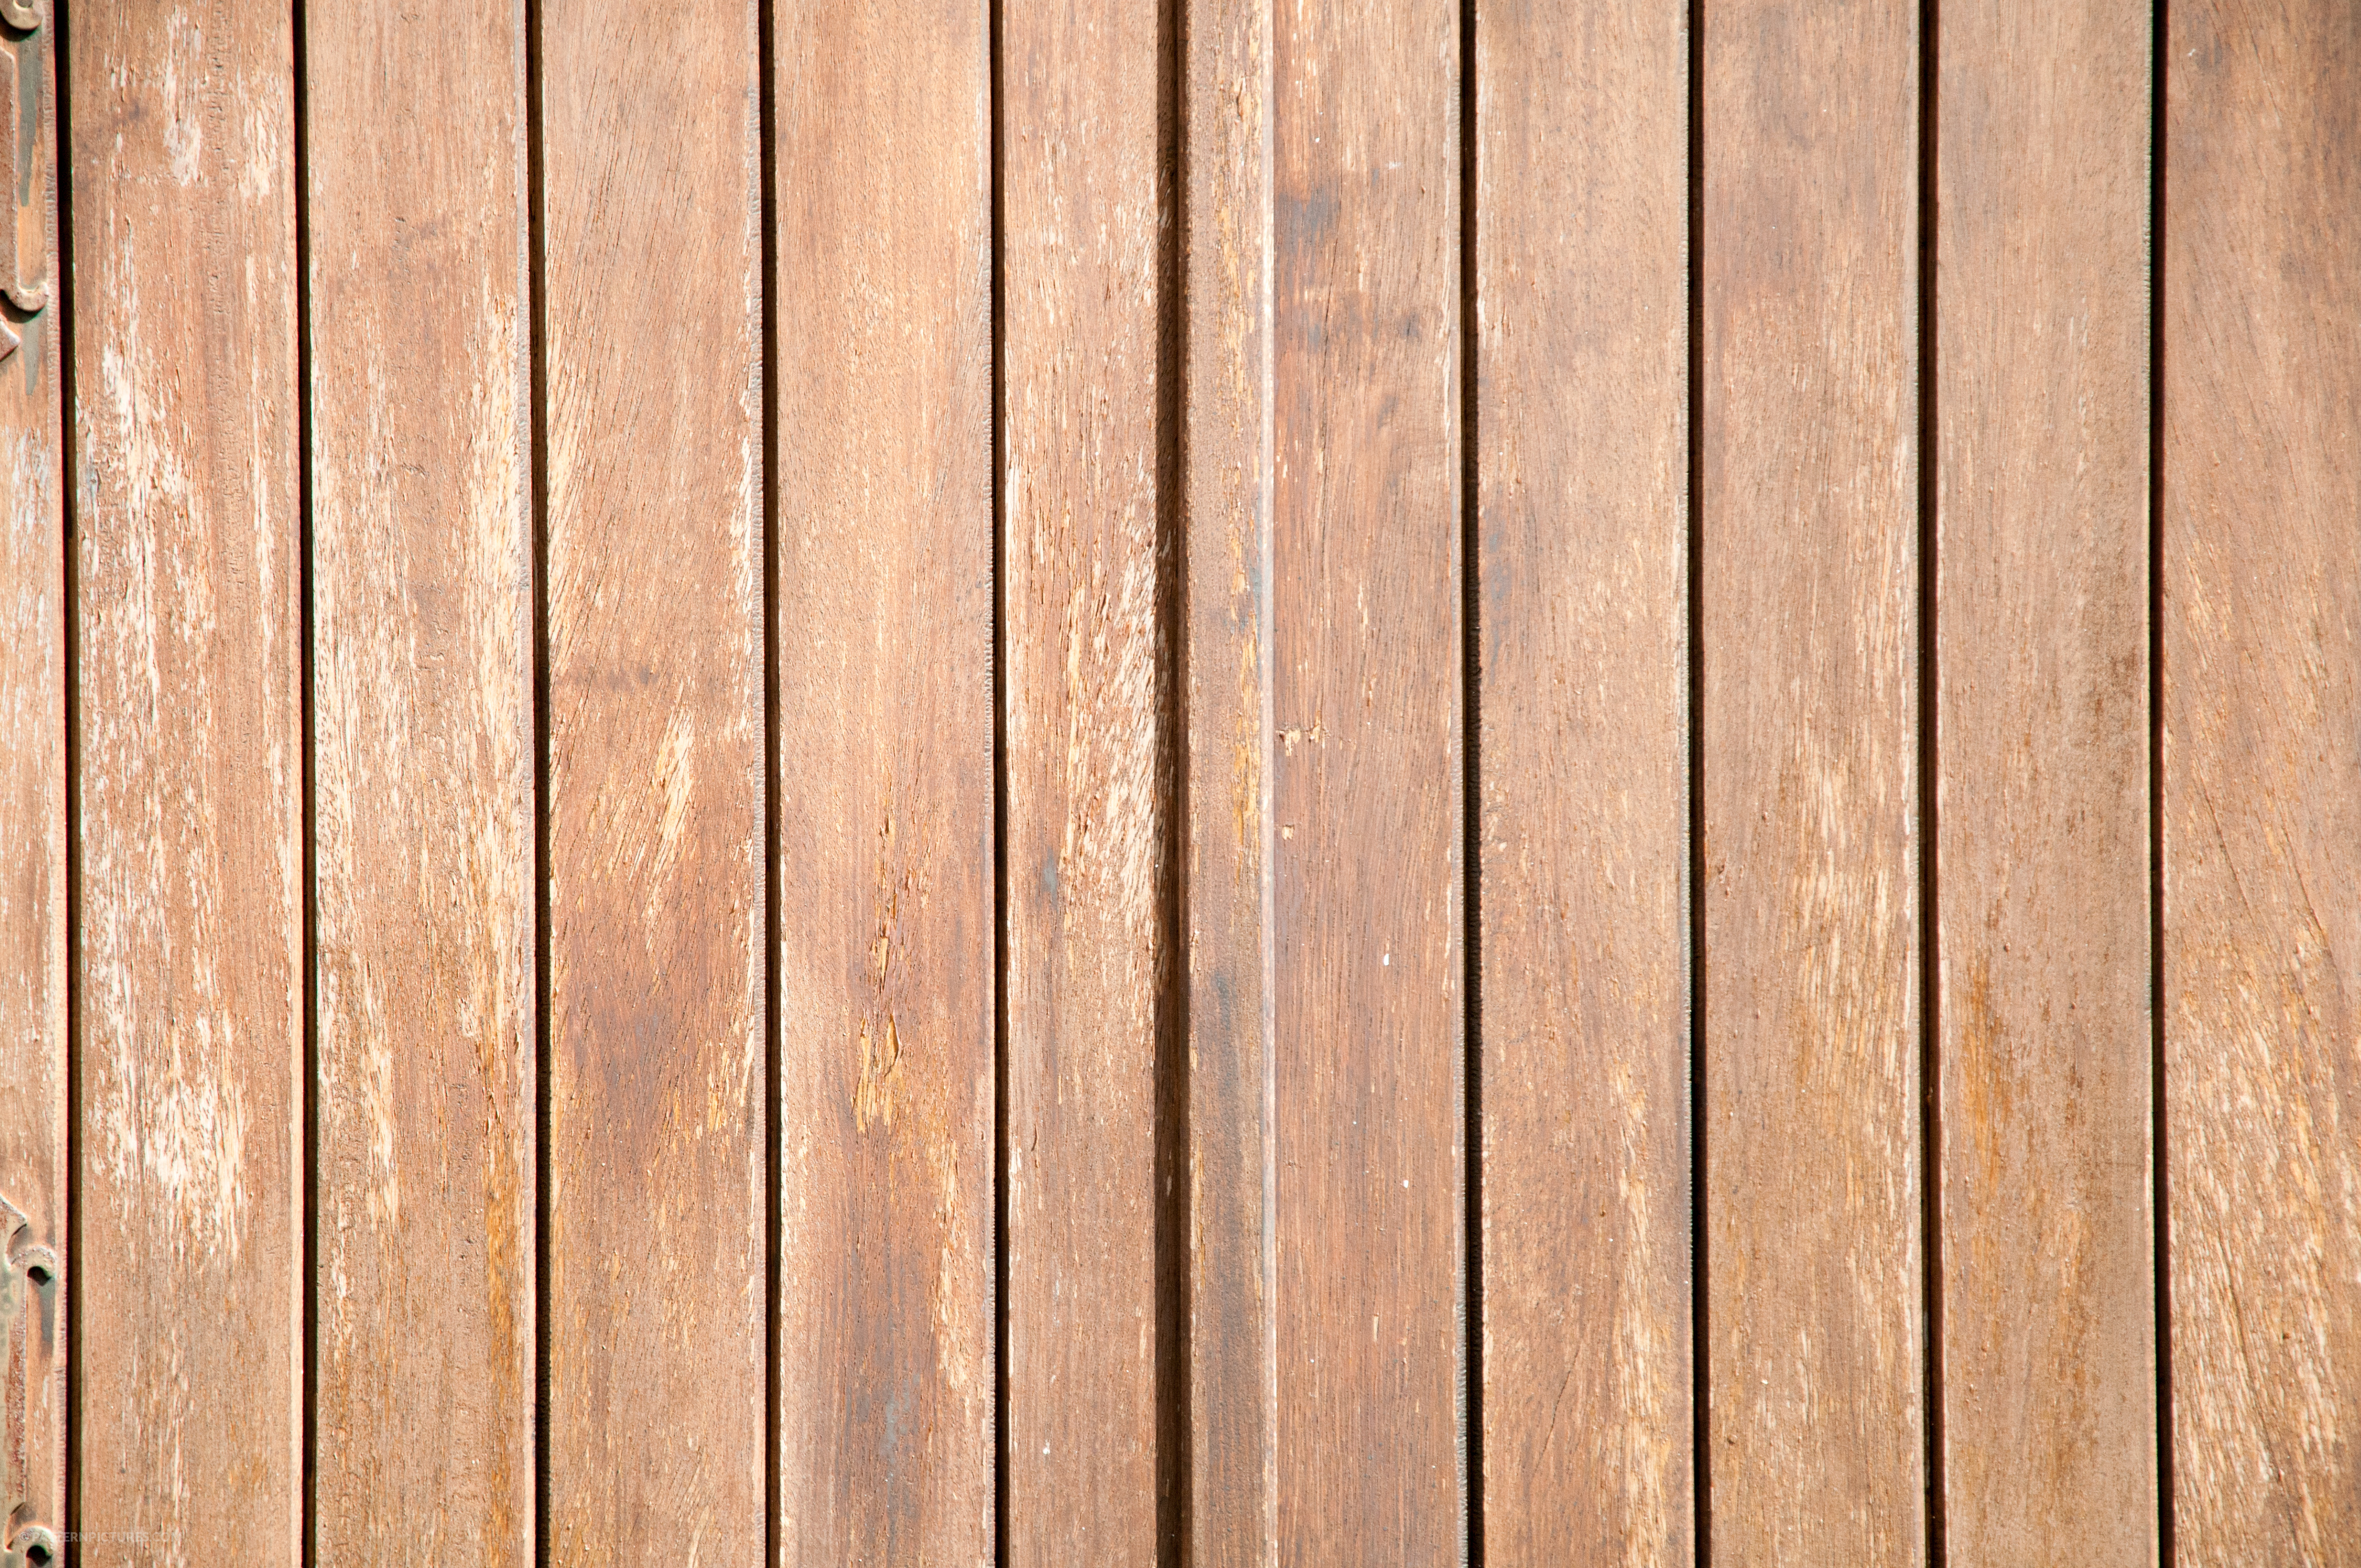 Wood Archives - Pattern Pictures free textures and free photos